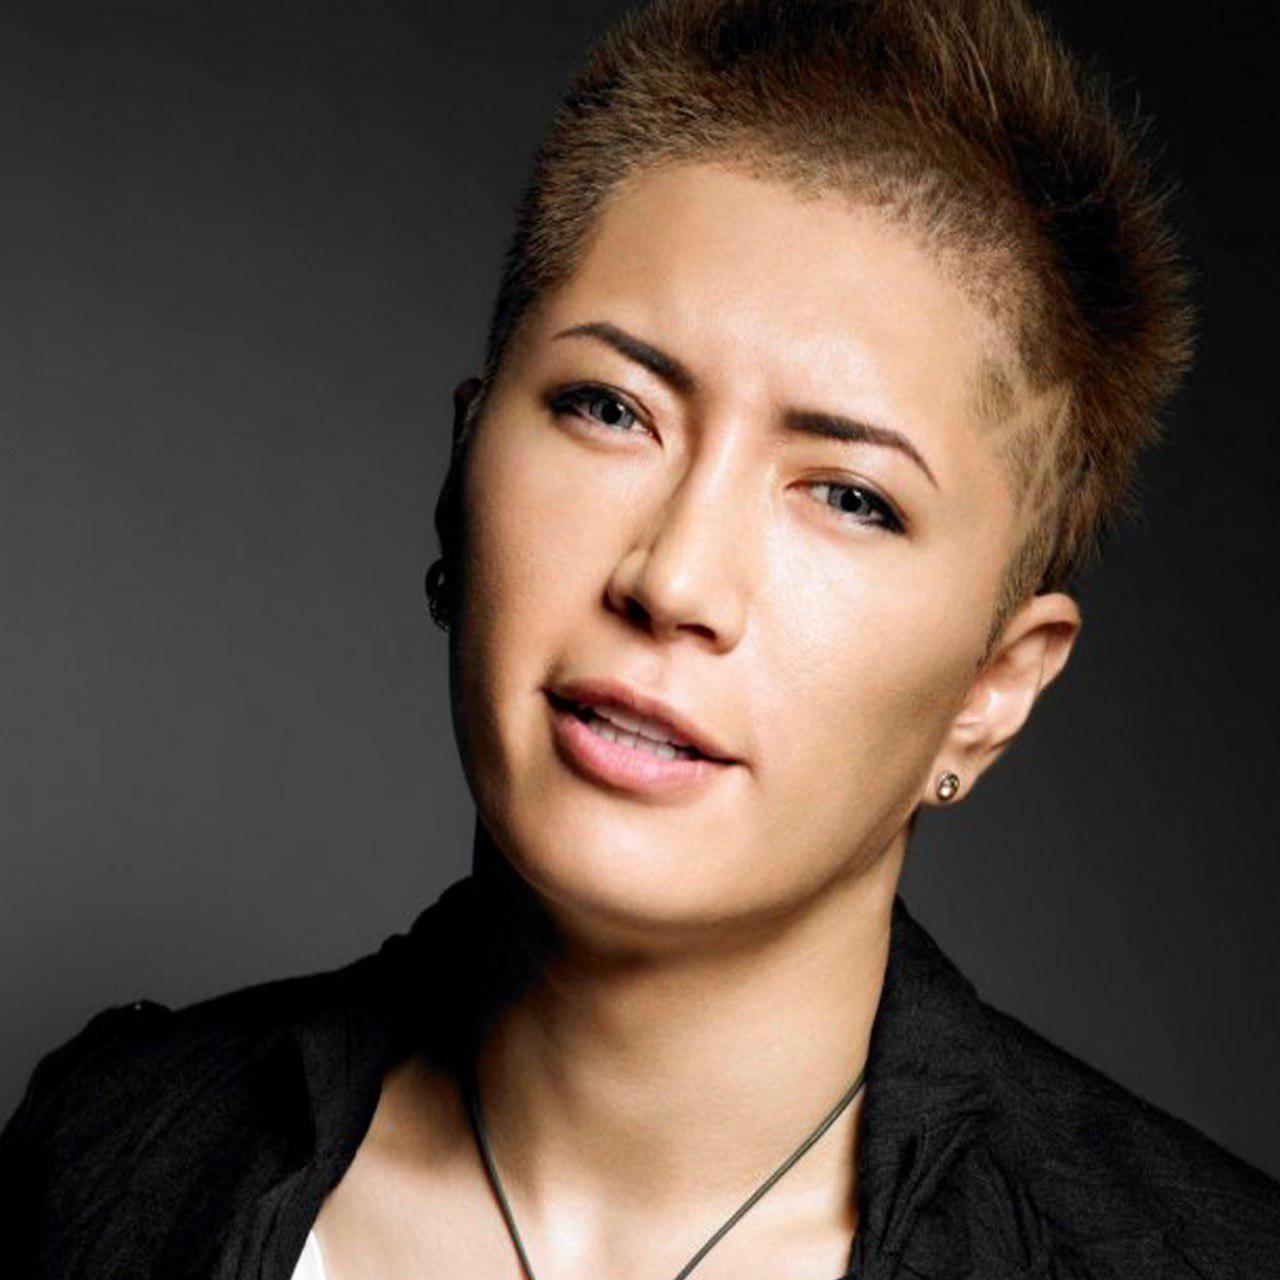 J-Pop Star GACKT Caught Between Crypto Company Spindle and Minister's Gaffe